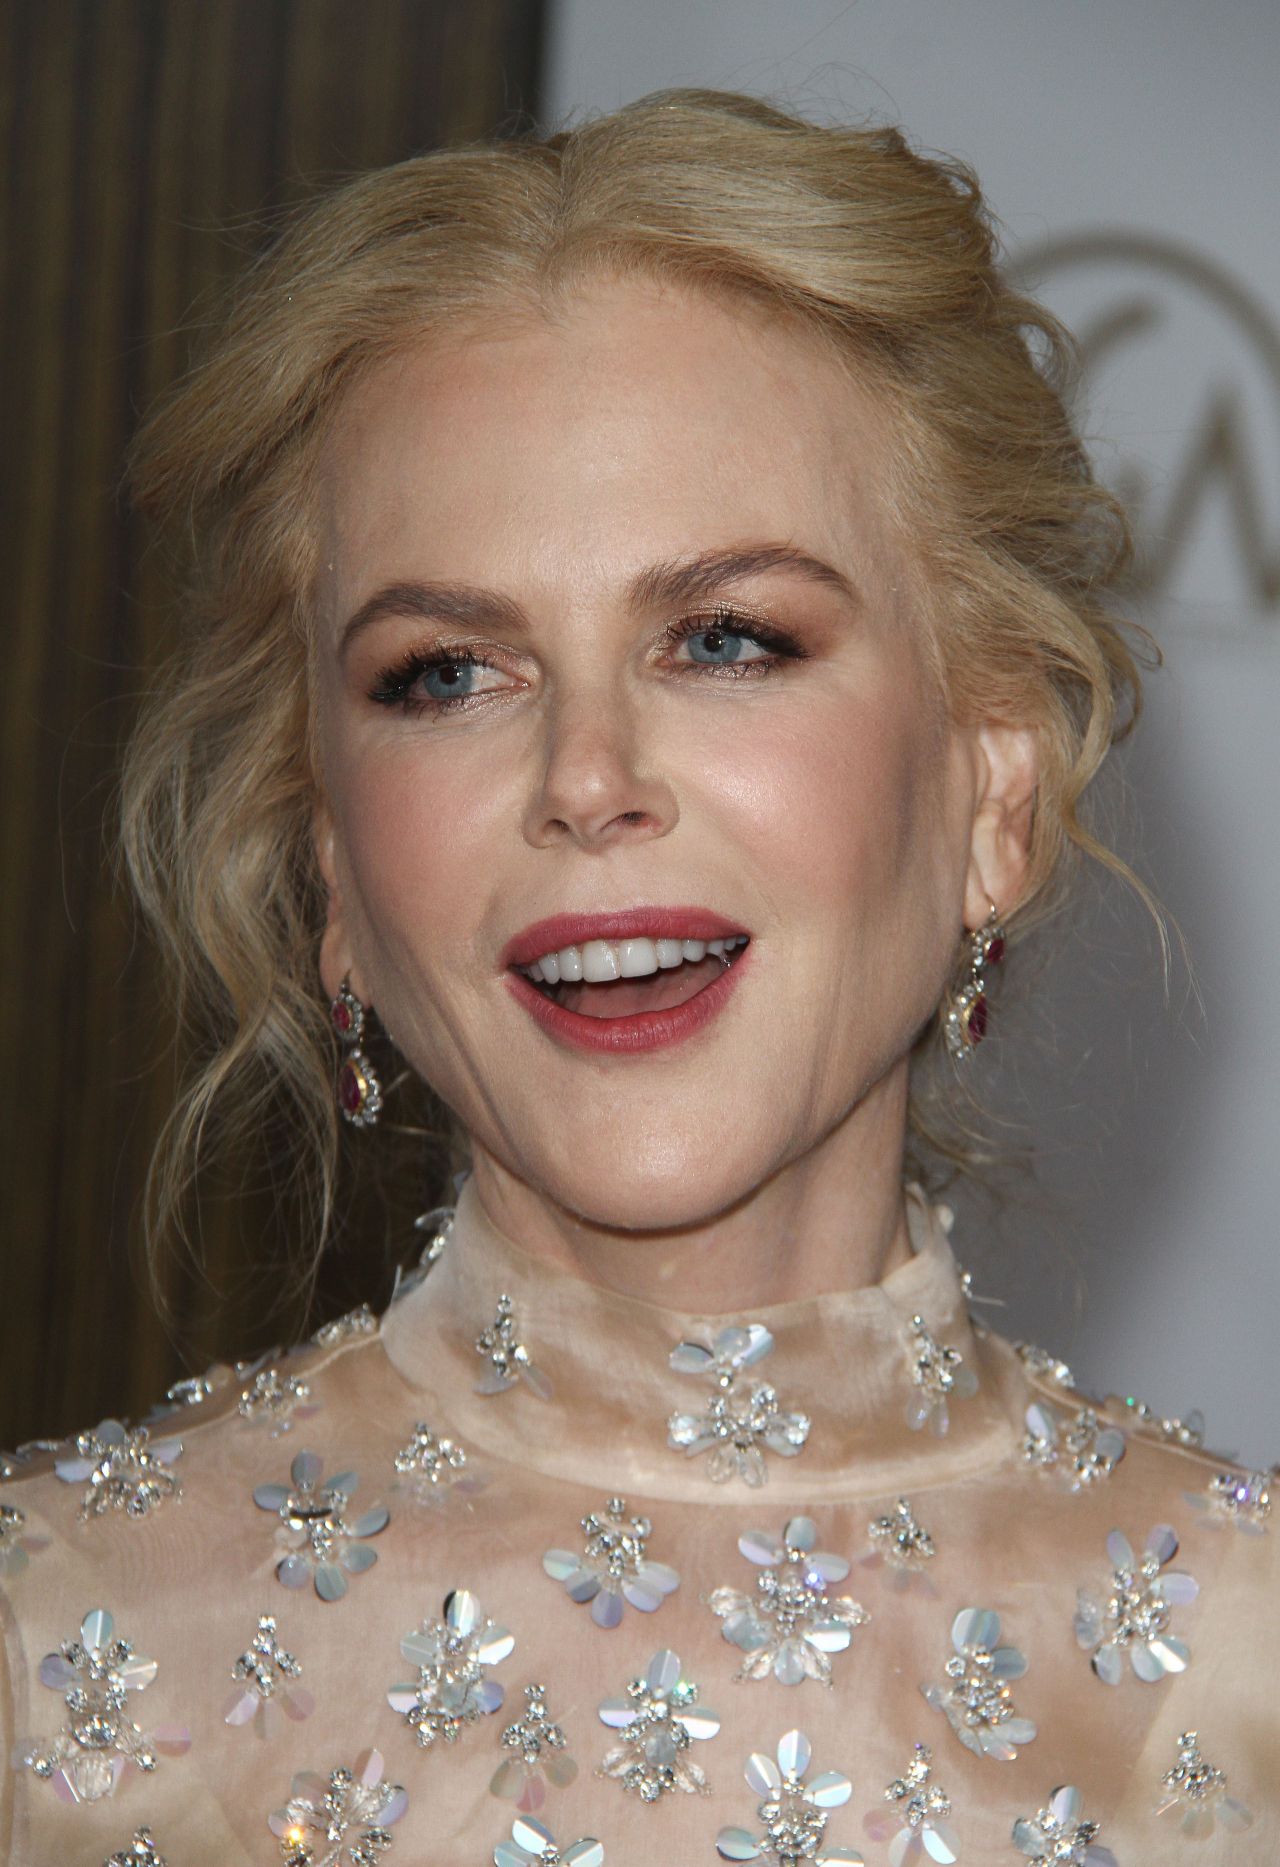 Nicole Kidman – Producers Guild Awards in Beverly Hills 1/28/ 2017